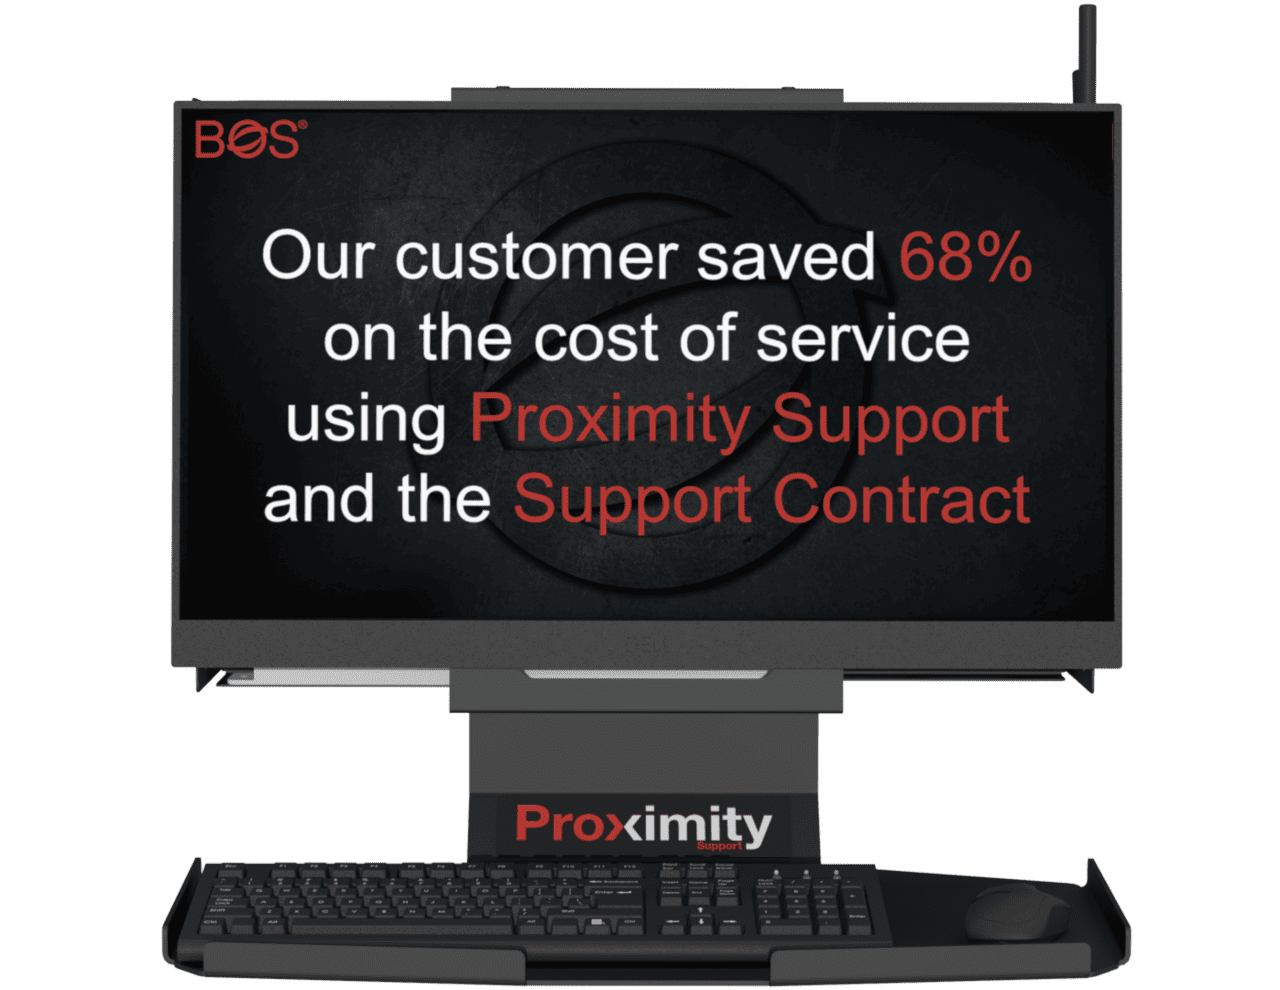 Proximity Support system displaying message: "Our customer saved 68% on the cost of service using Proximity Support and the Support Contract"